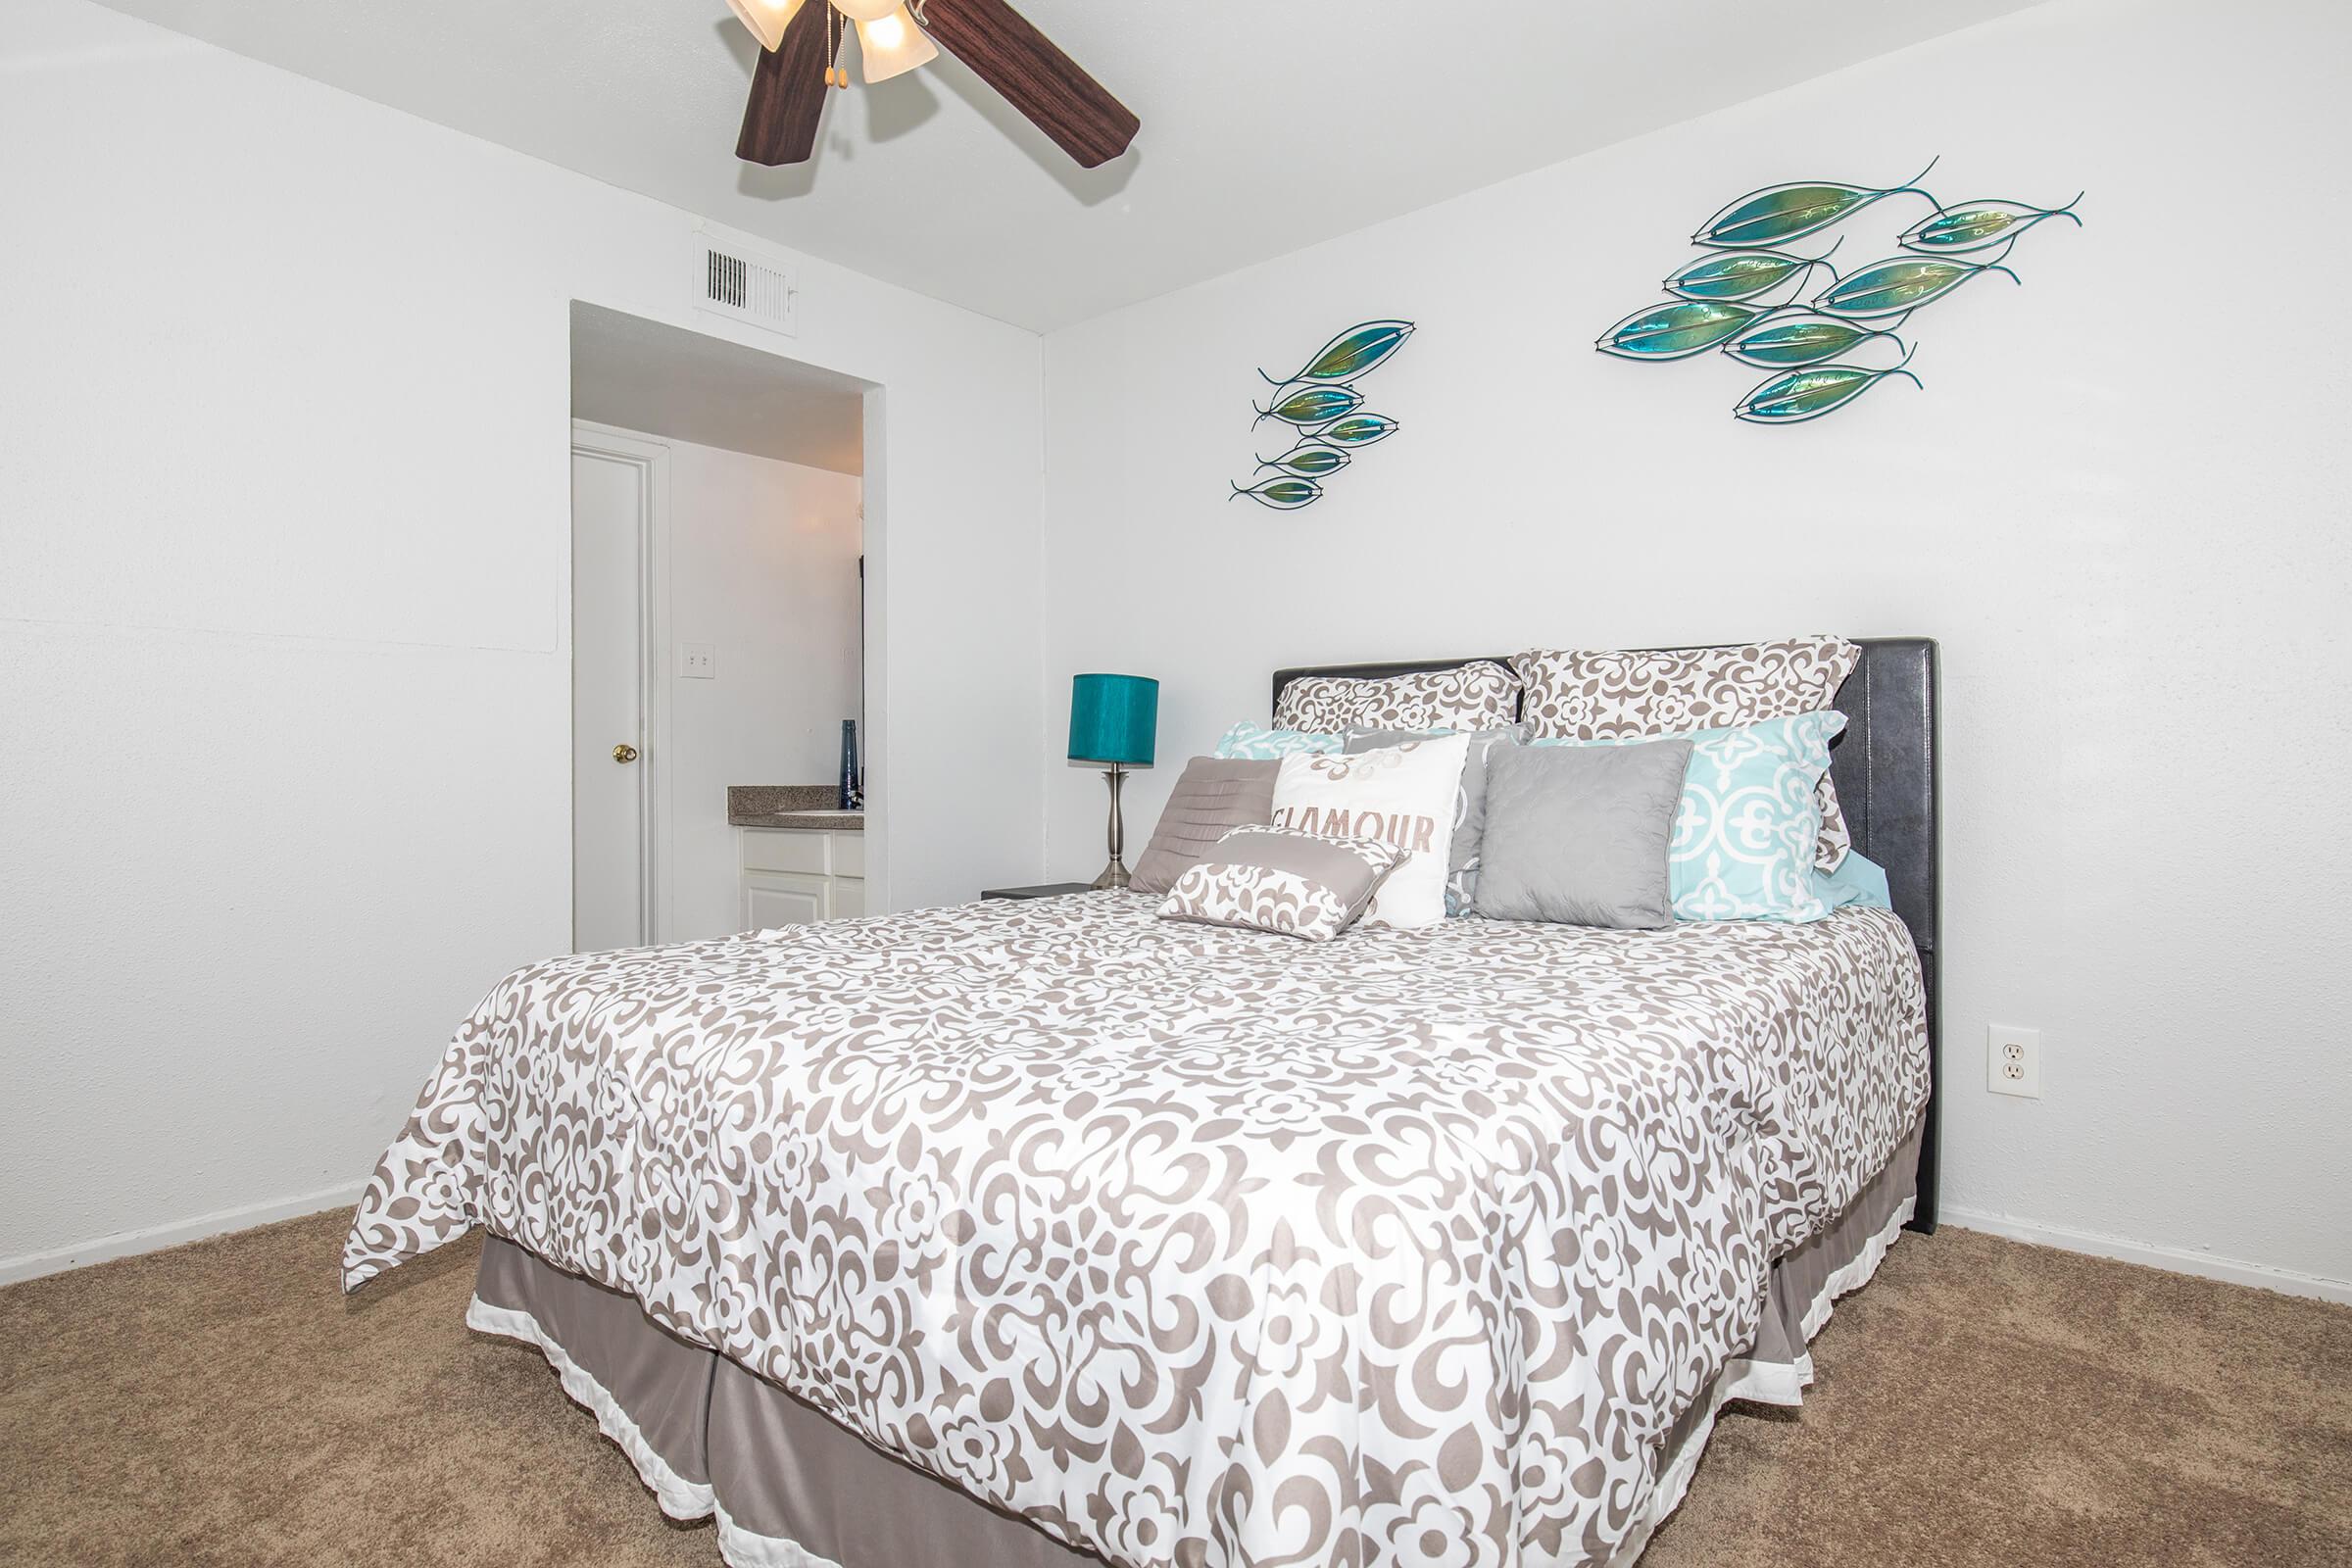 1 & 2 BEDROOM APARTMENTS FOR RENT IN HOUSTON, TX